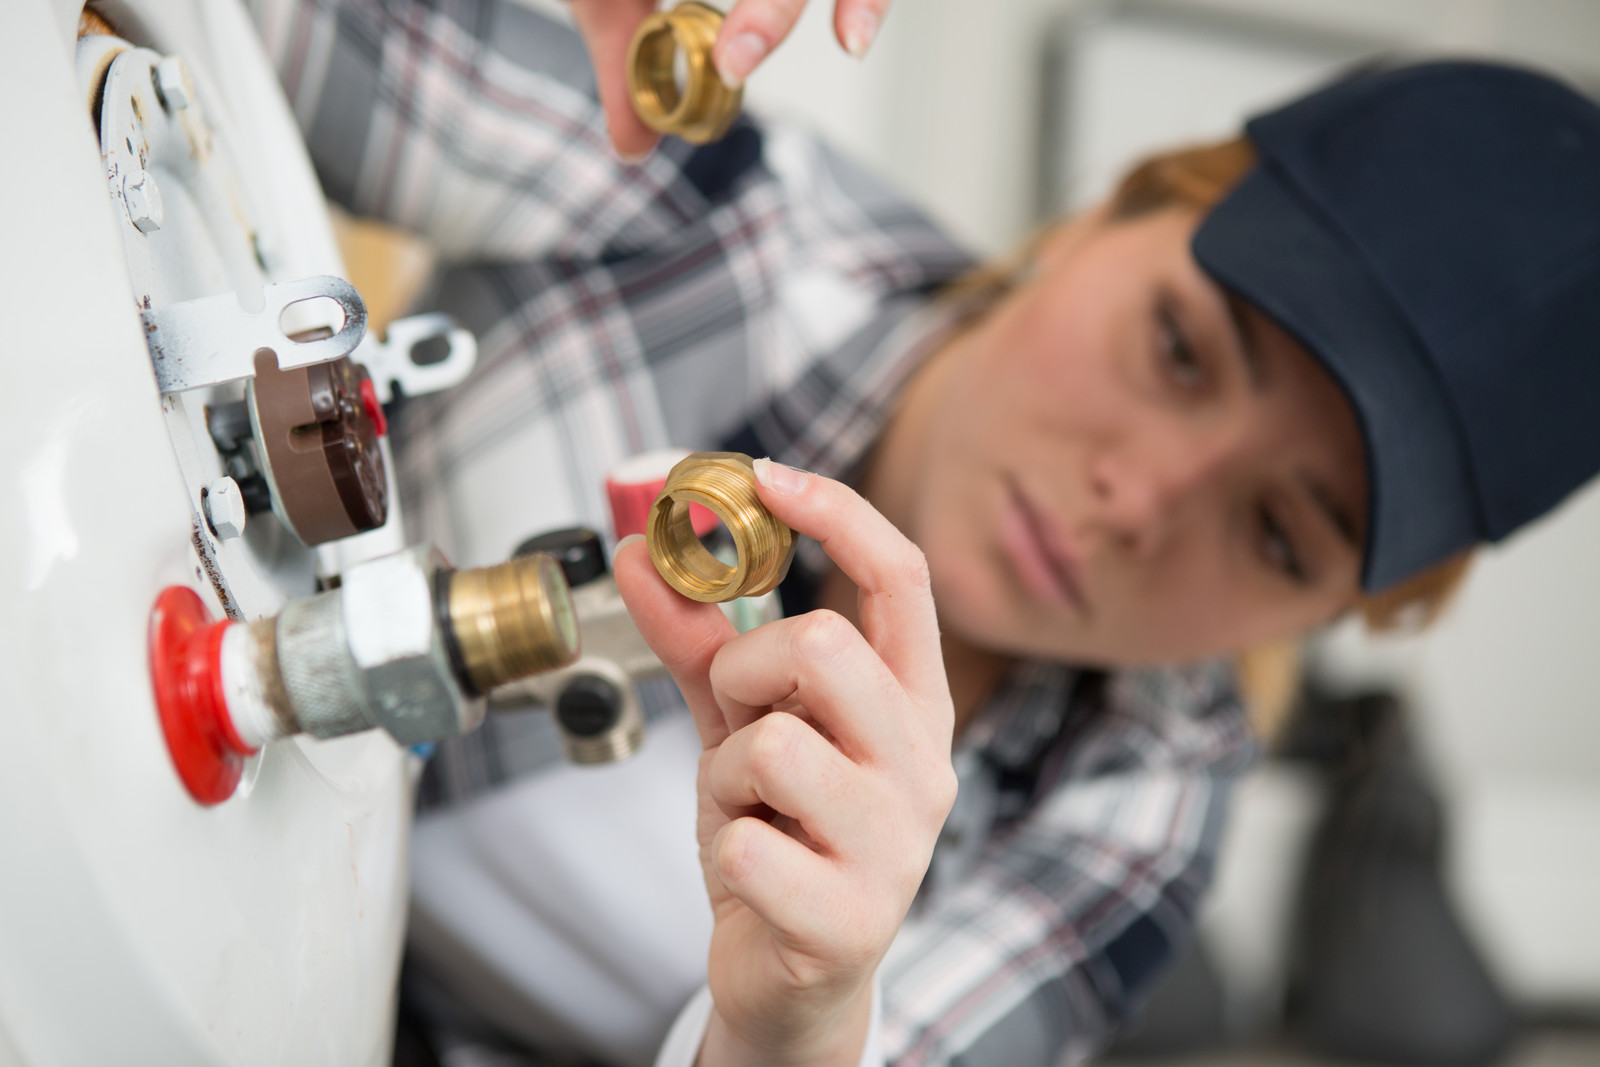 Boiler vs. Water Heater, Which Do You Need?